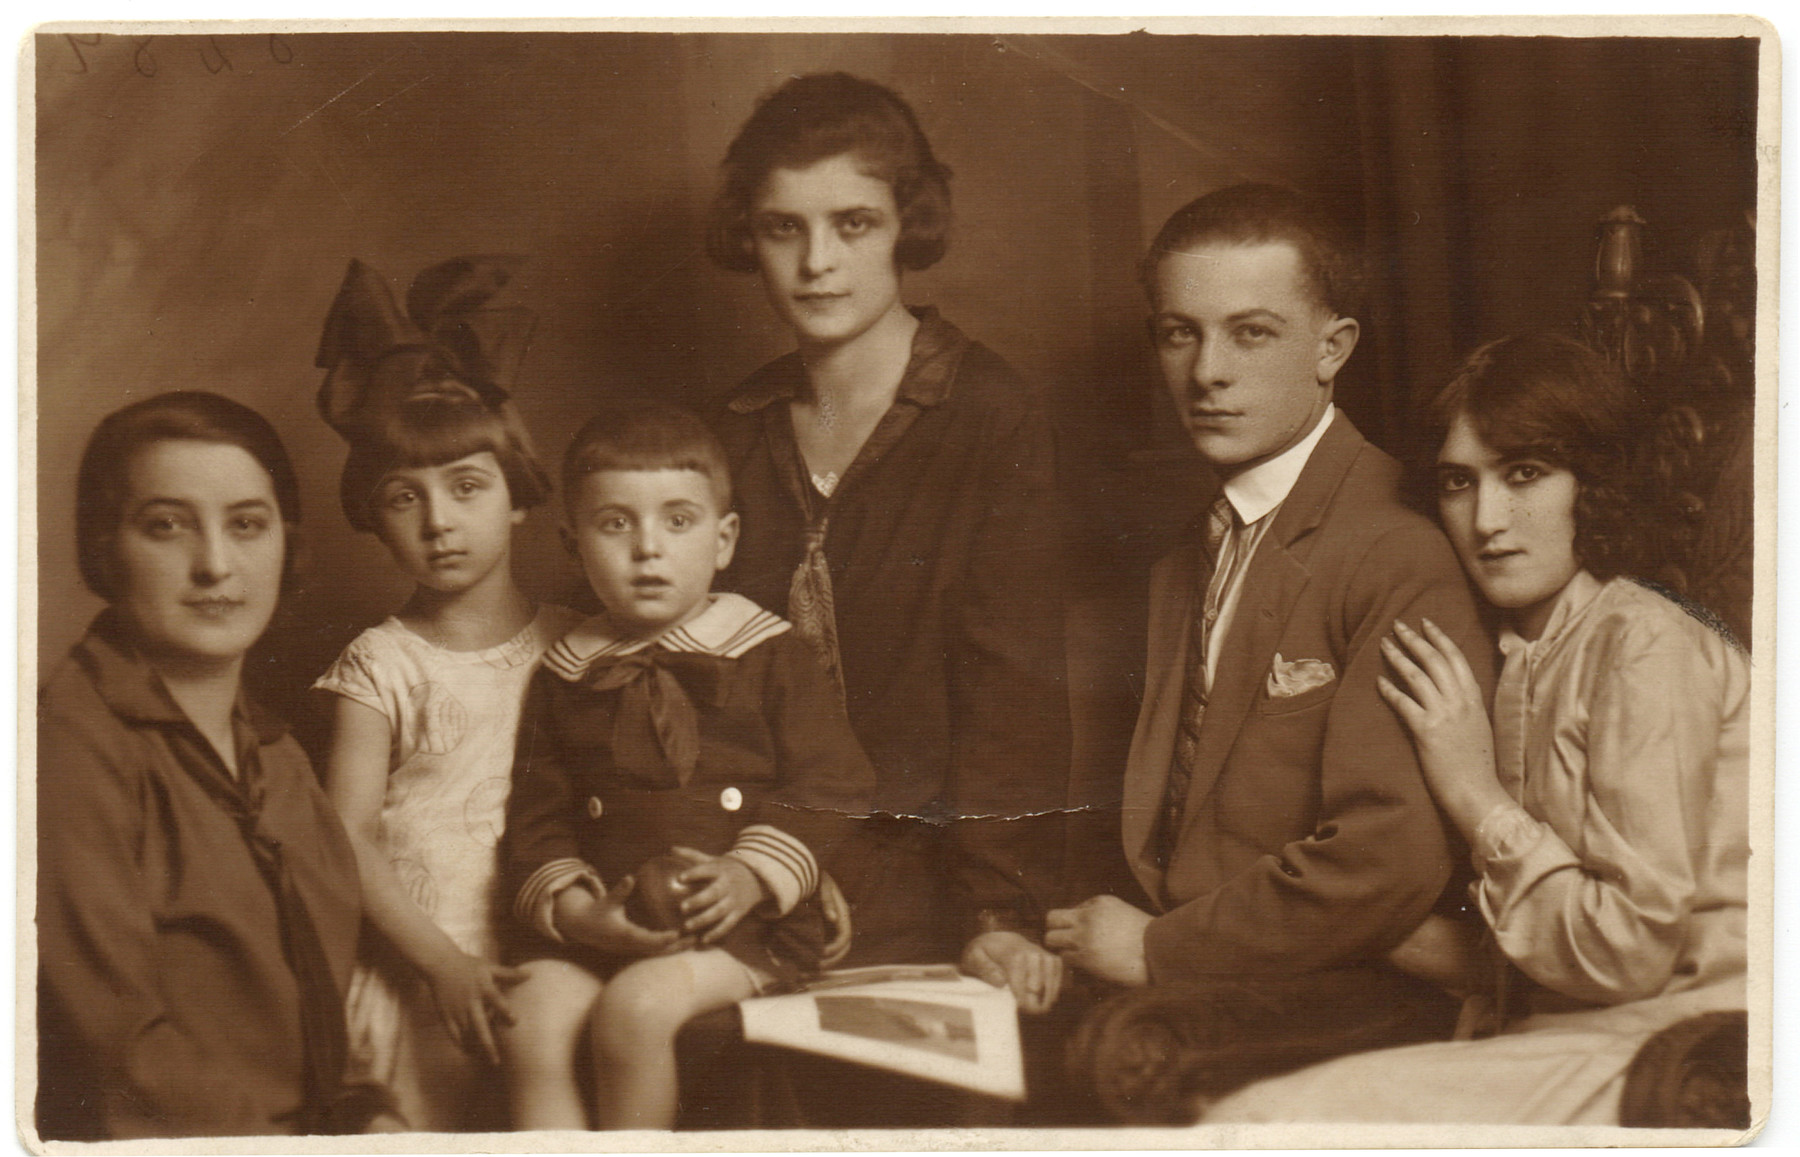 Studio portrait of a prewar Jewish family in Lodz, Poland.

Pictured on the far right is Helena Bilander Kellner and her husband.